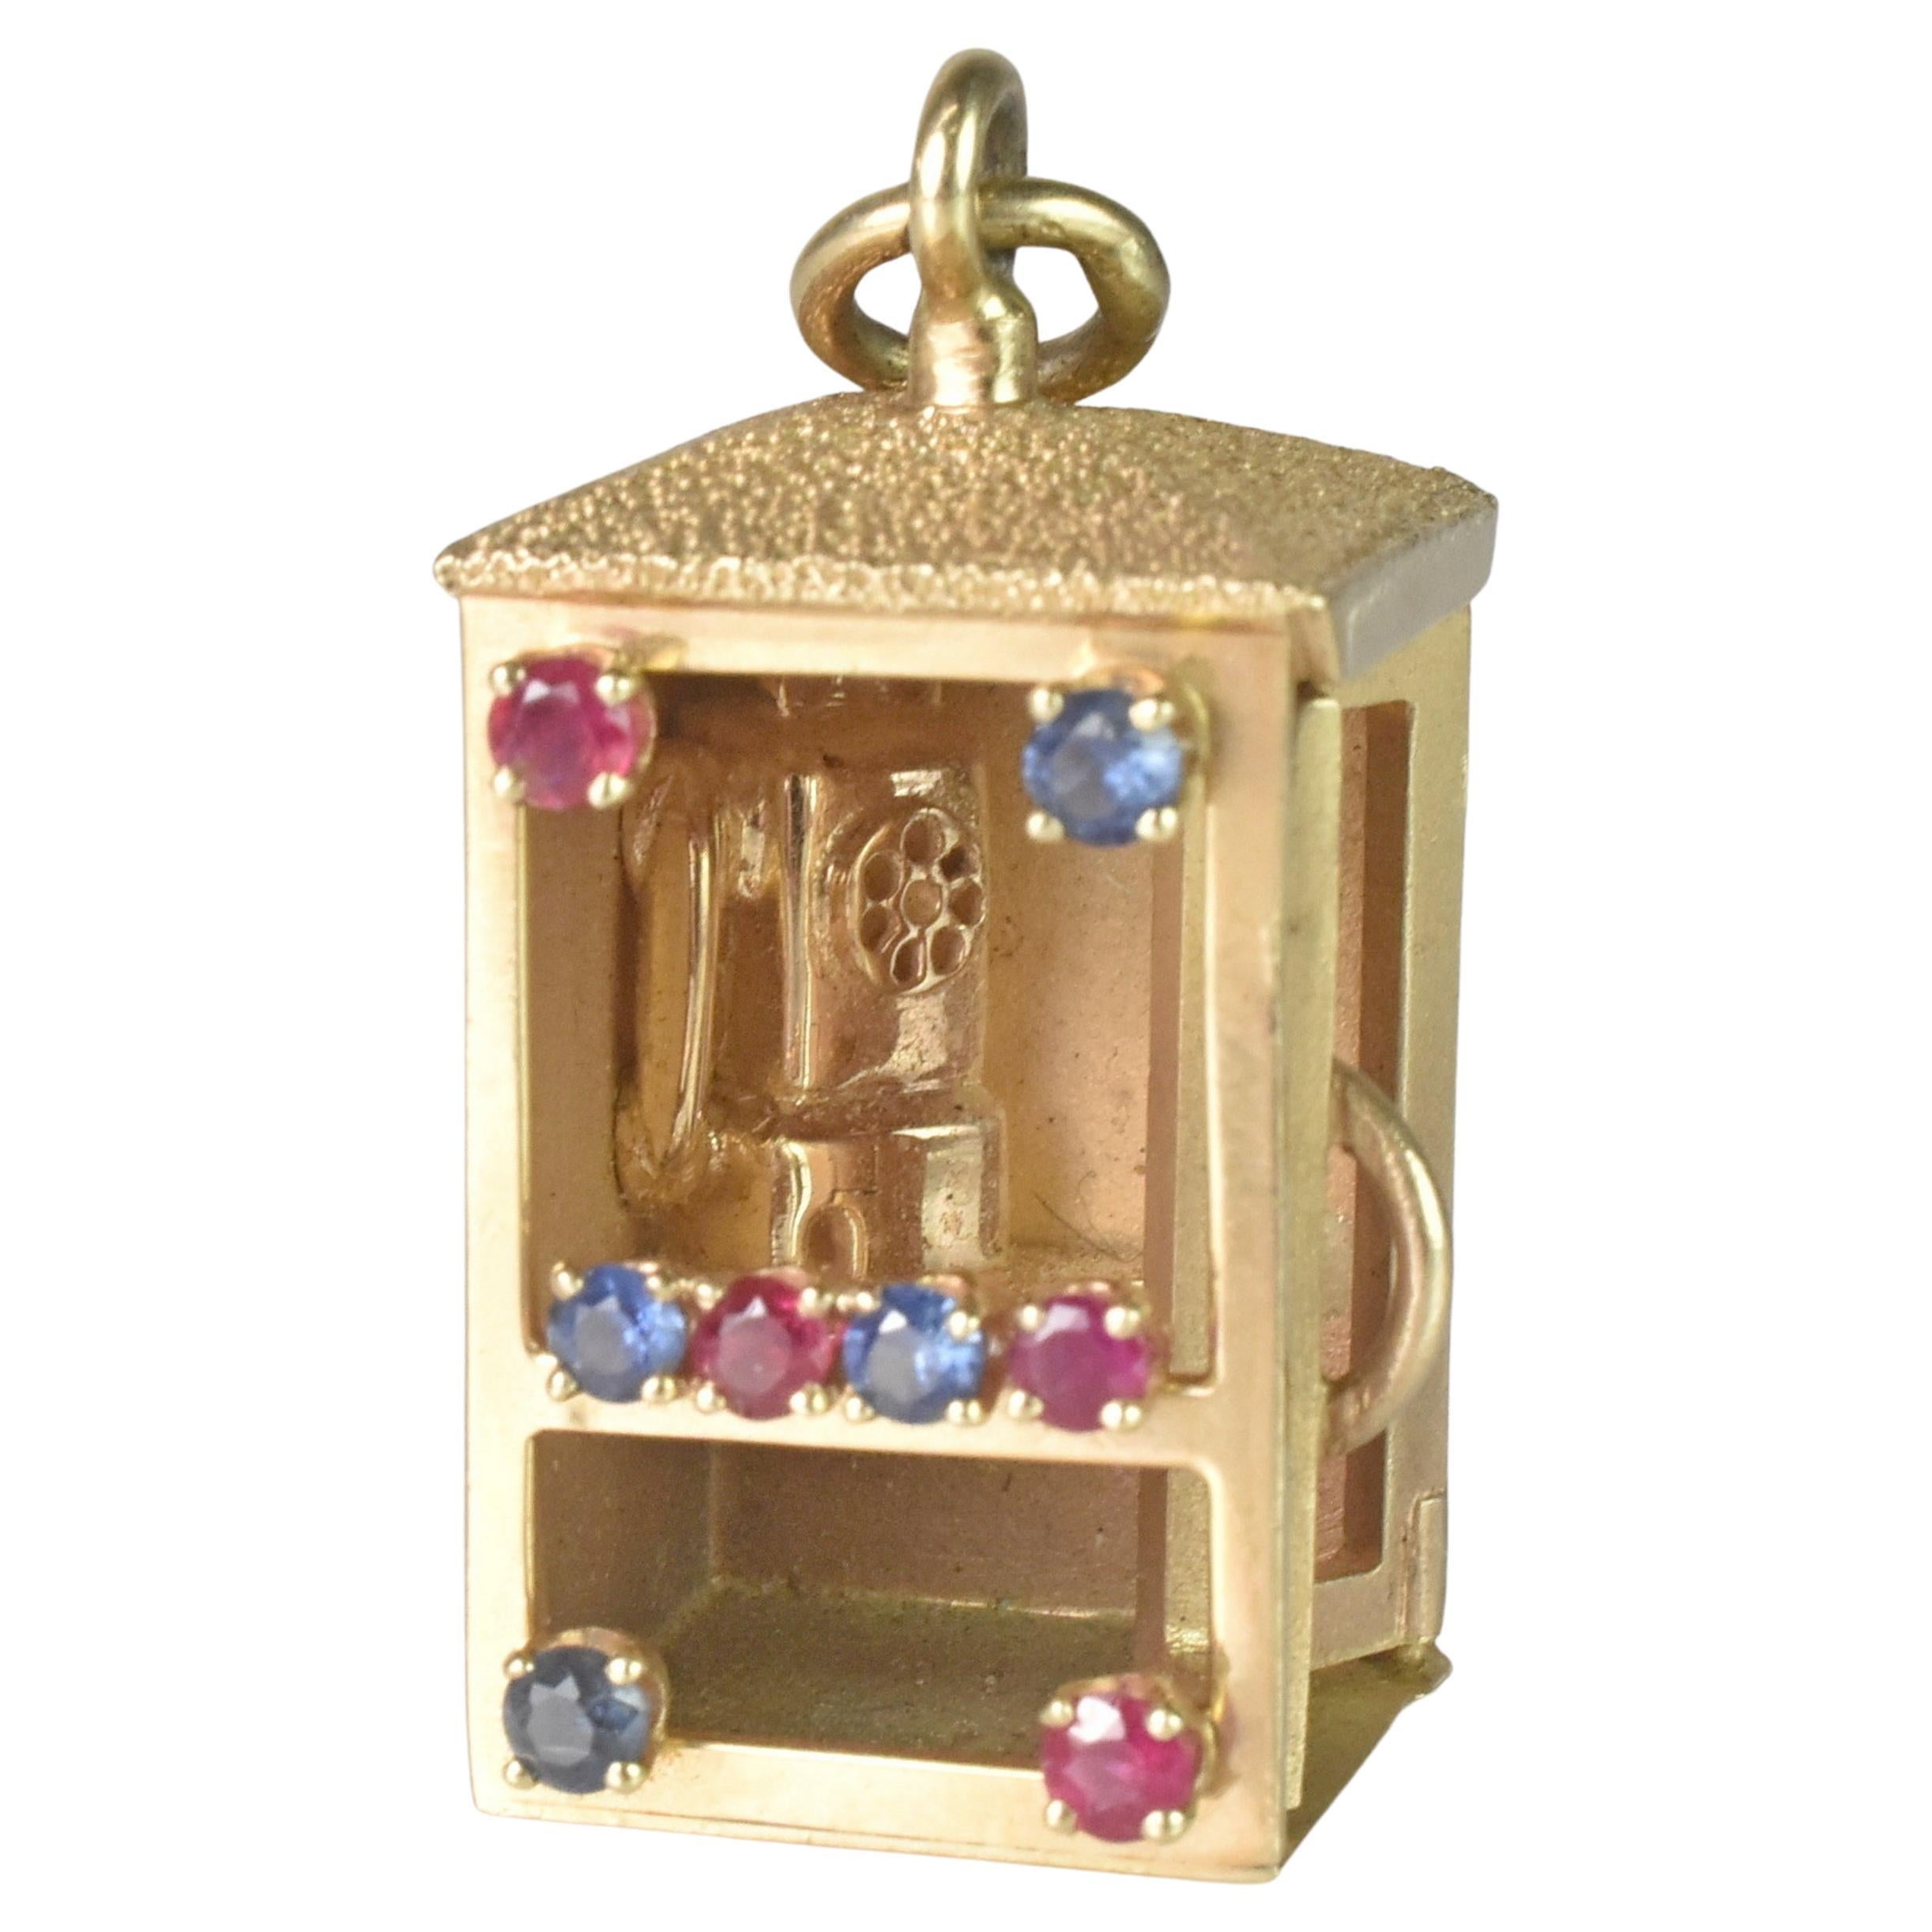 14k Gold Phonebooth Charm Pendant with Gems by Dankner